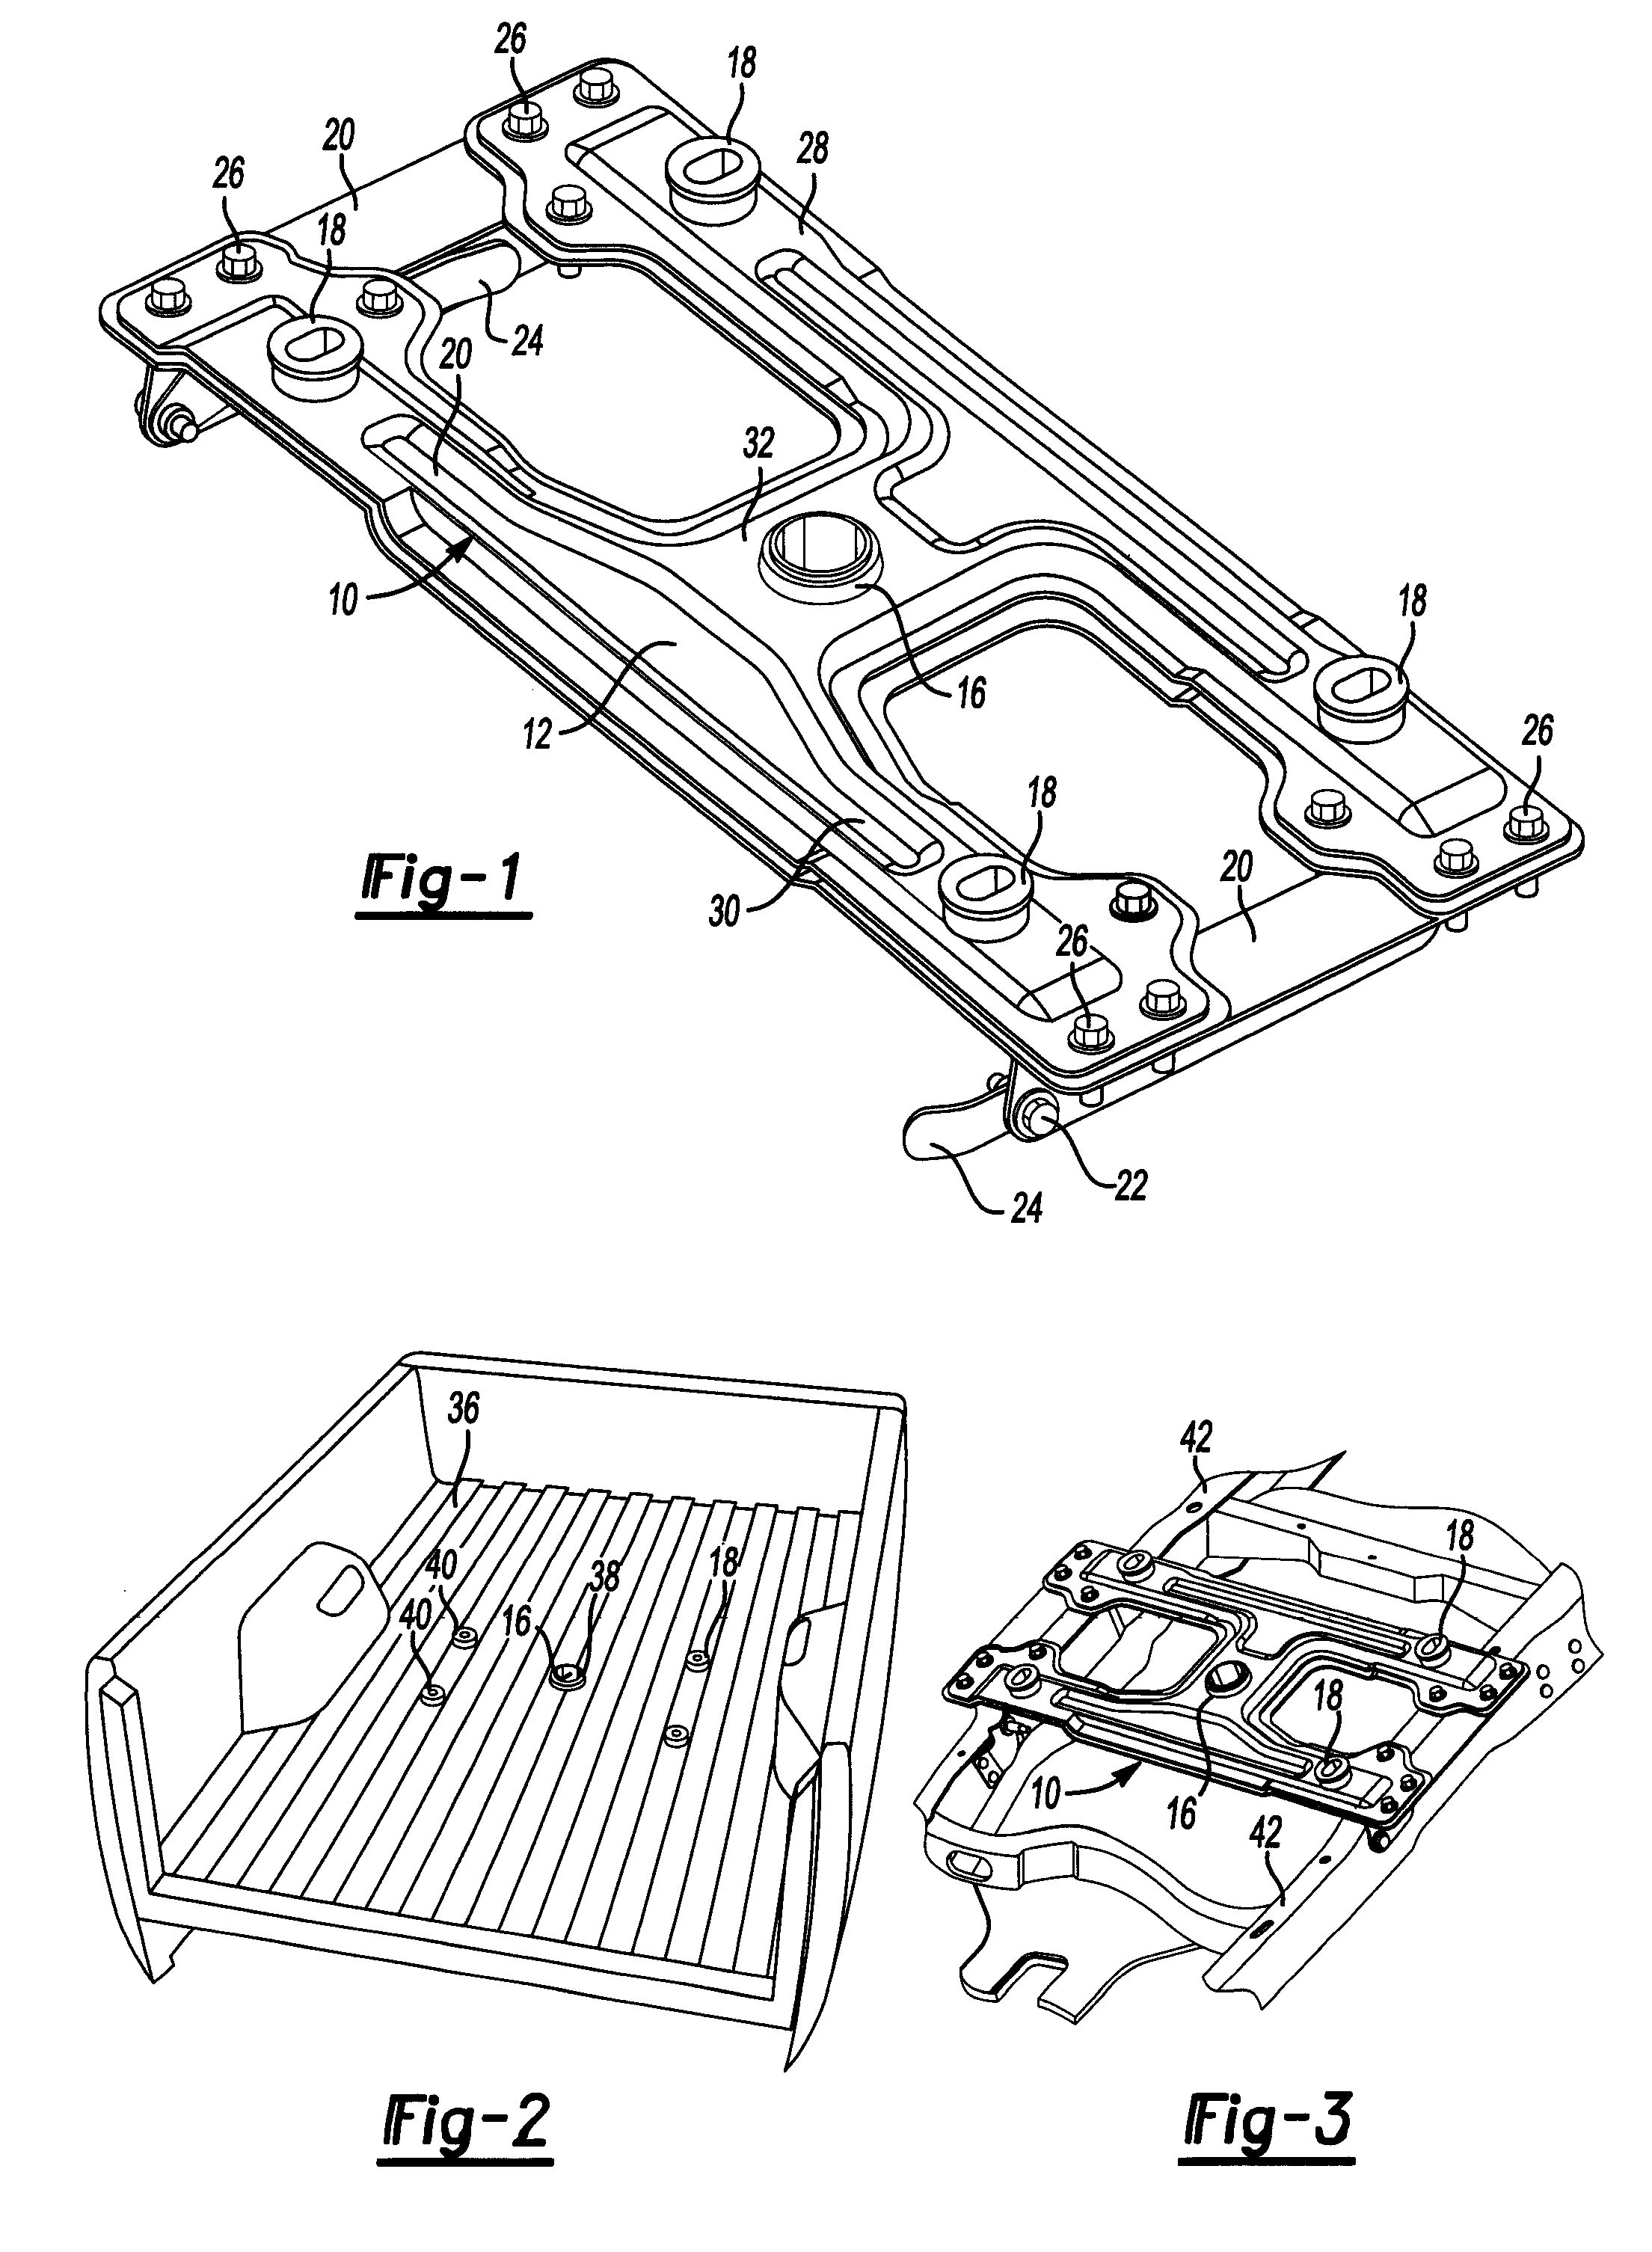 Integrated support structure for either a fifth wheel hitch or a gooseneck trailer hitch